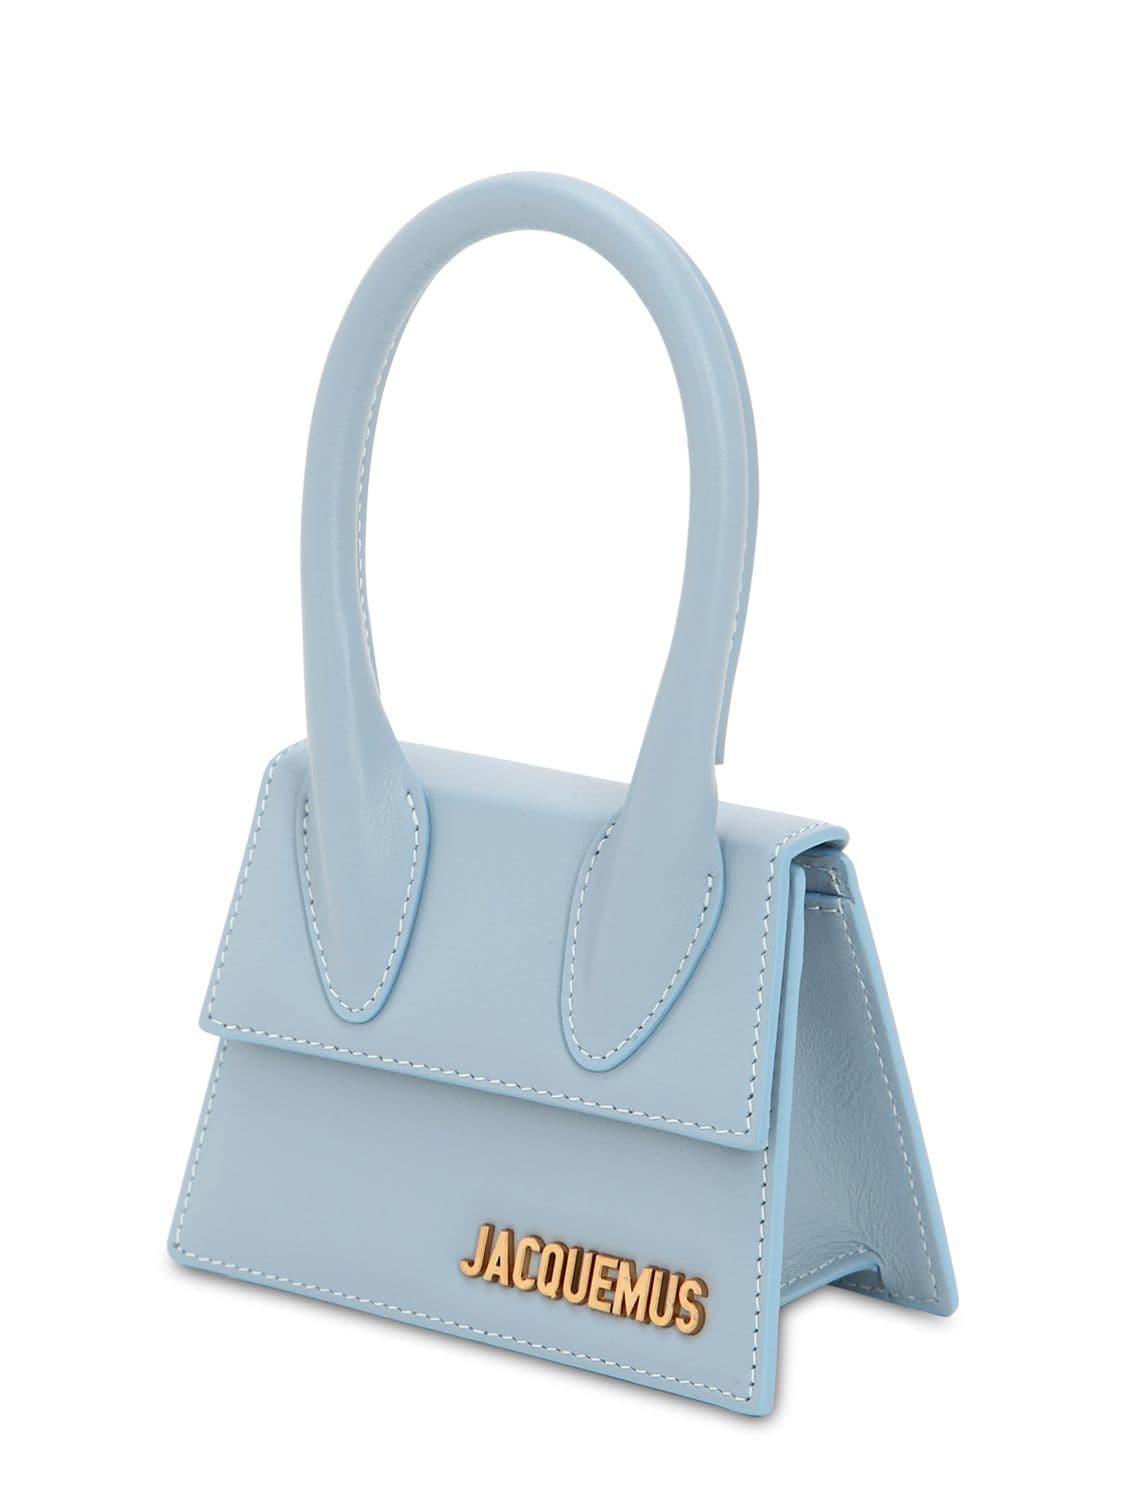 Jacquemus Le Chiquito Leather Bag in Light Blue (Blue) - Lyst